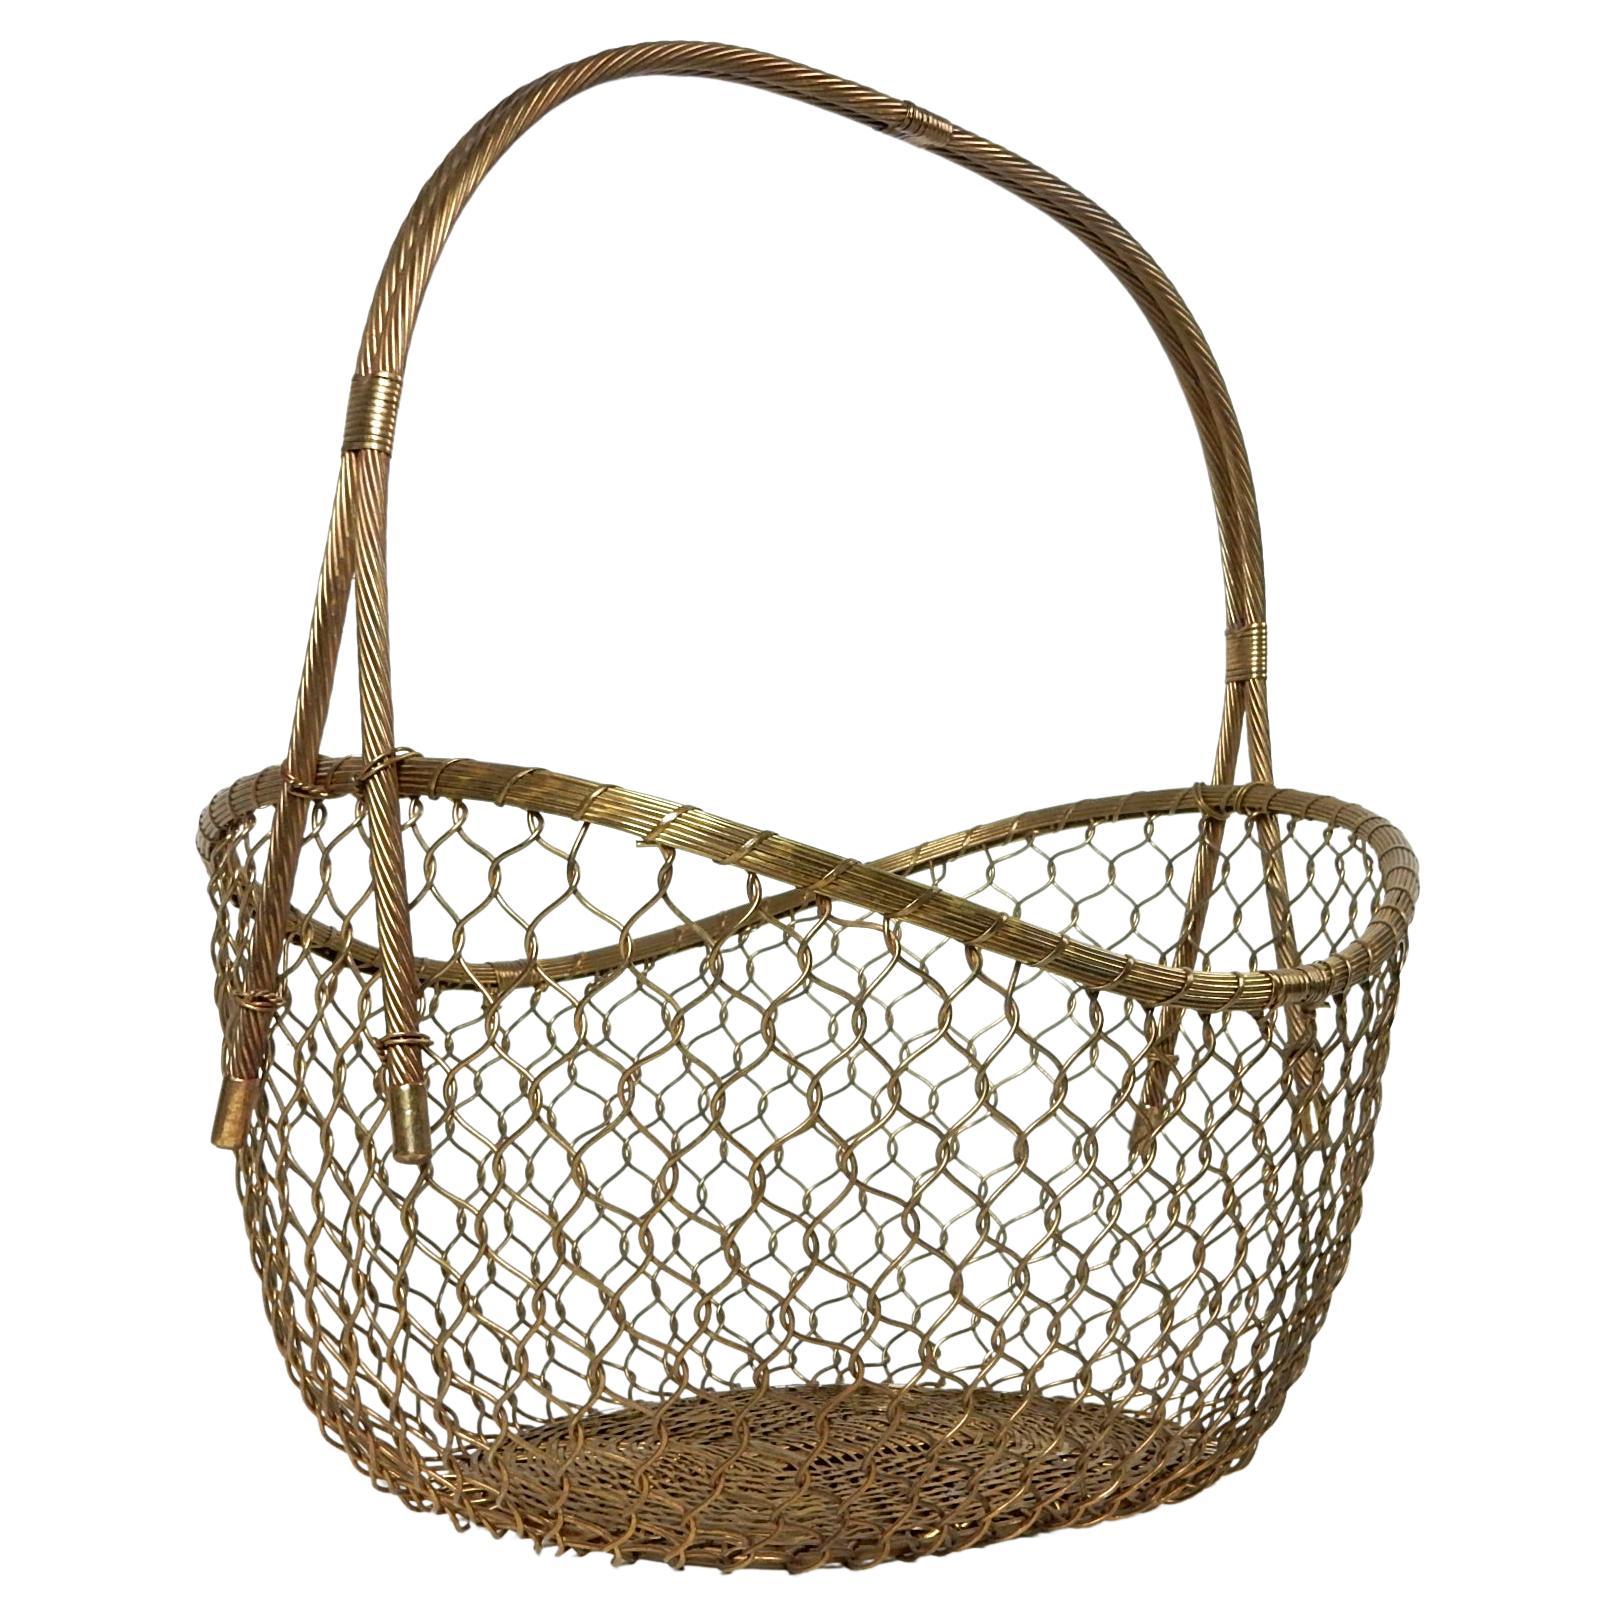 Exceptionally large and exquisitely crafted solid brass woven basket circa 1970.
The detail is amazing at this scale. Holds dozens of your favorite magazines or
a few blankets or?
It is a solid and does not flex like a wicker basket.